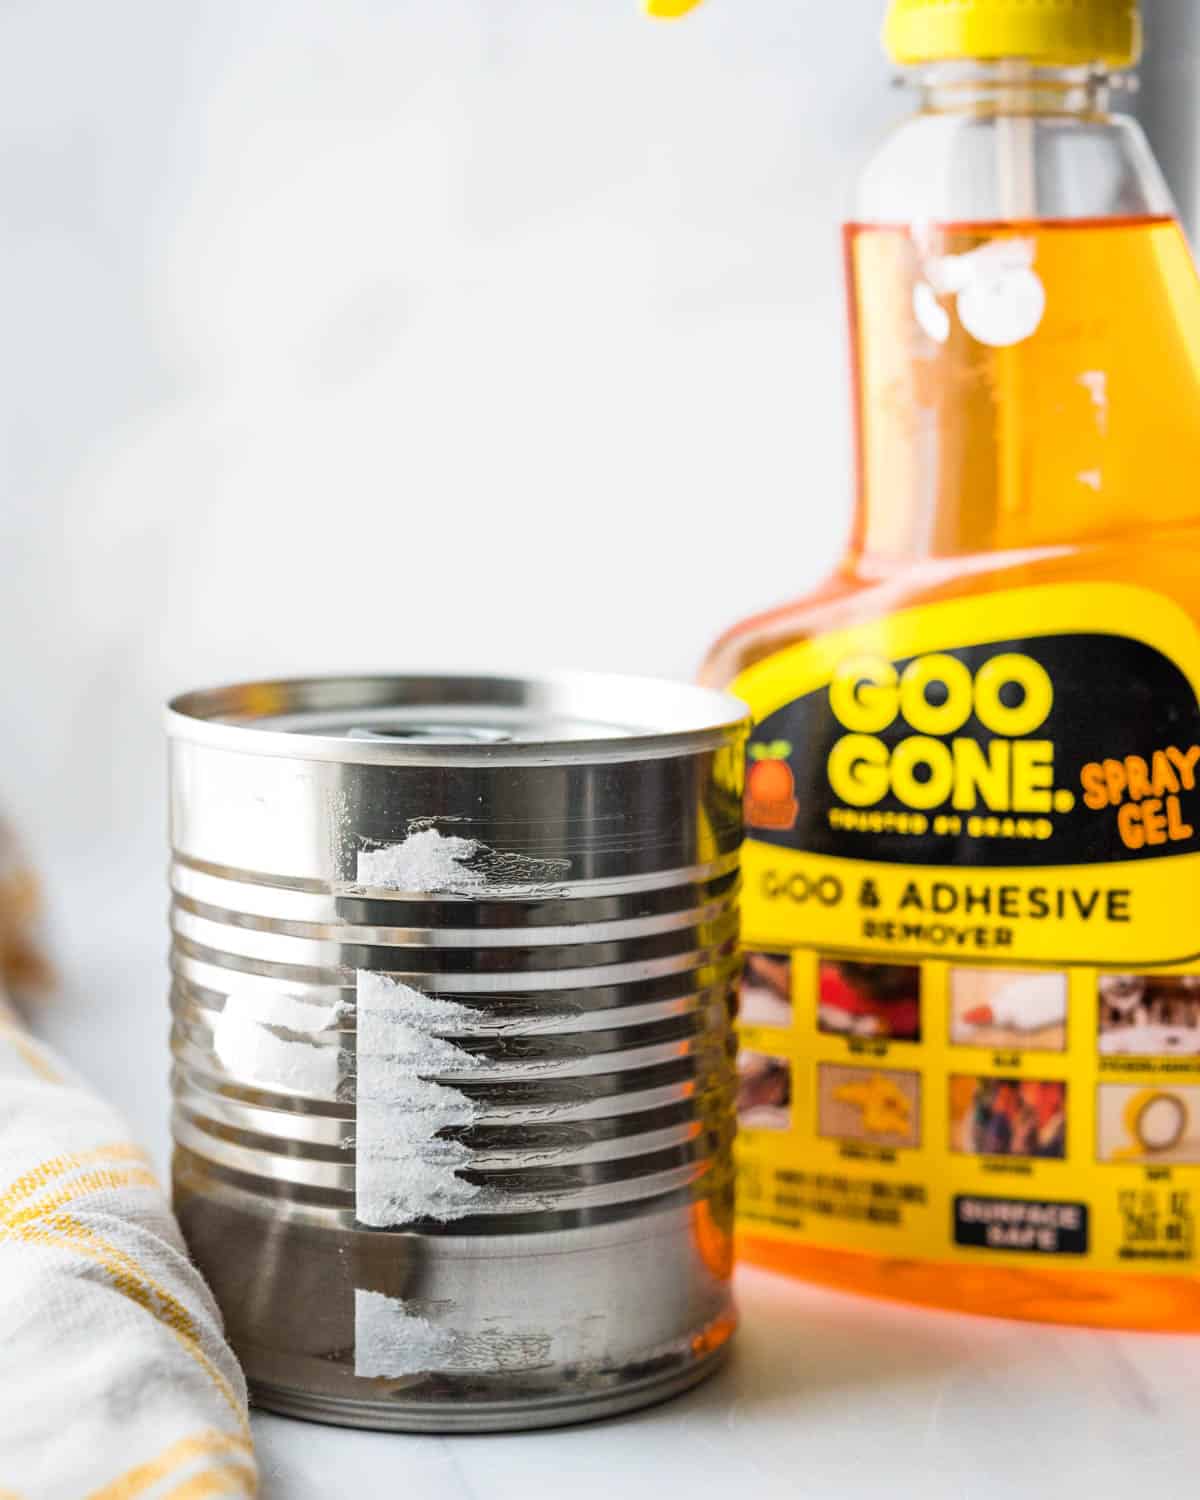 Goo-Gone gets the adhesive off the can so you can cook with it and not ruin your pot.